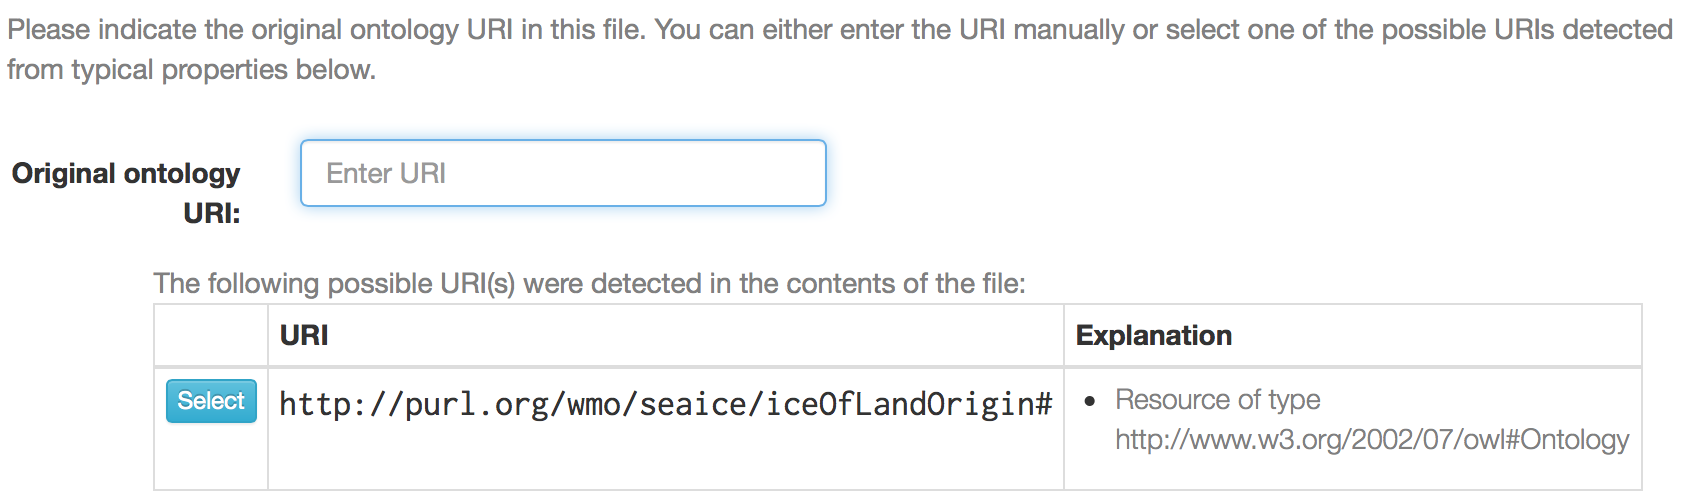 Ontology IRI selection for local file